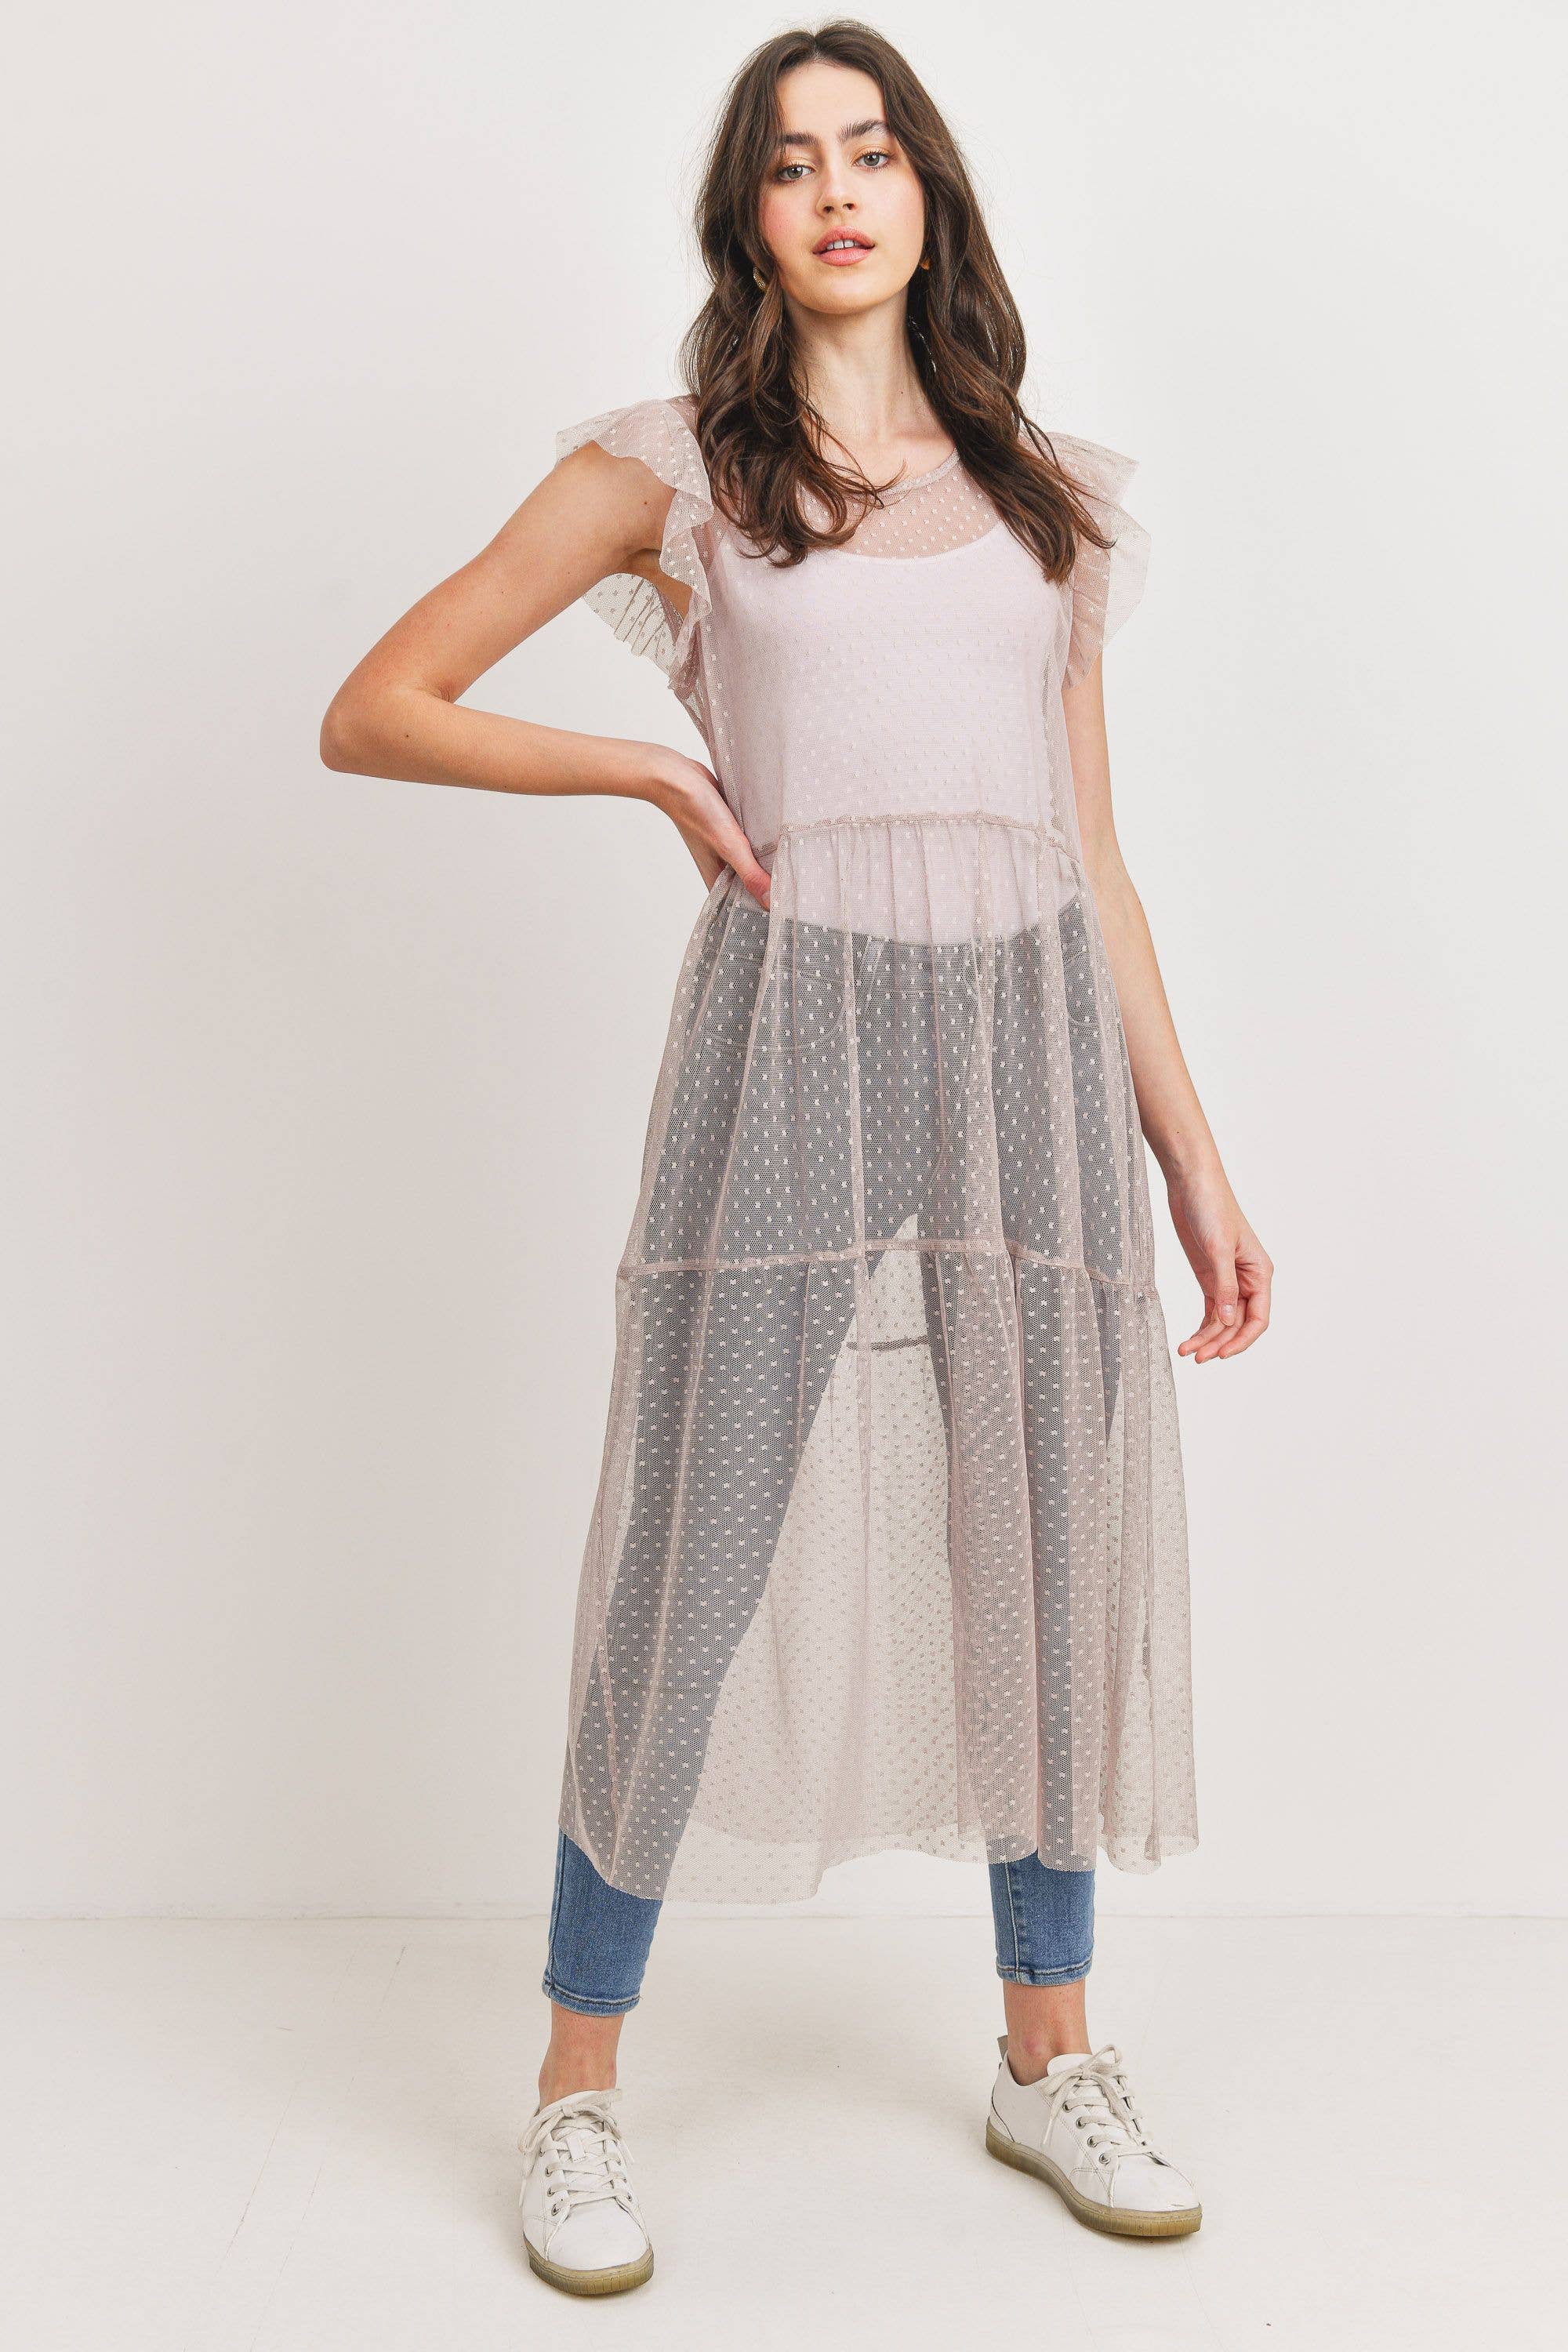 Grace and Lace two tiered chiffon dress extender